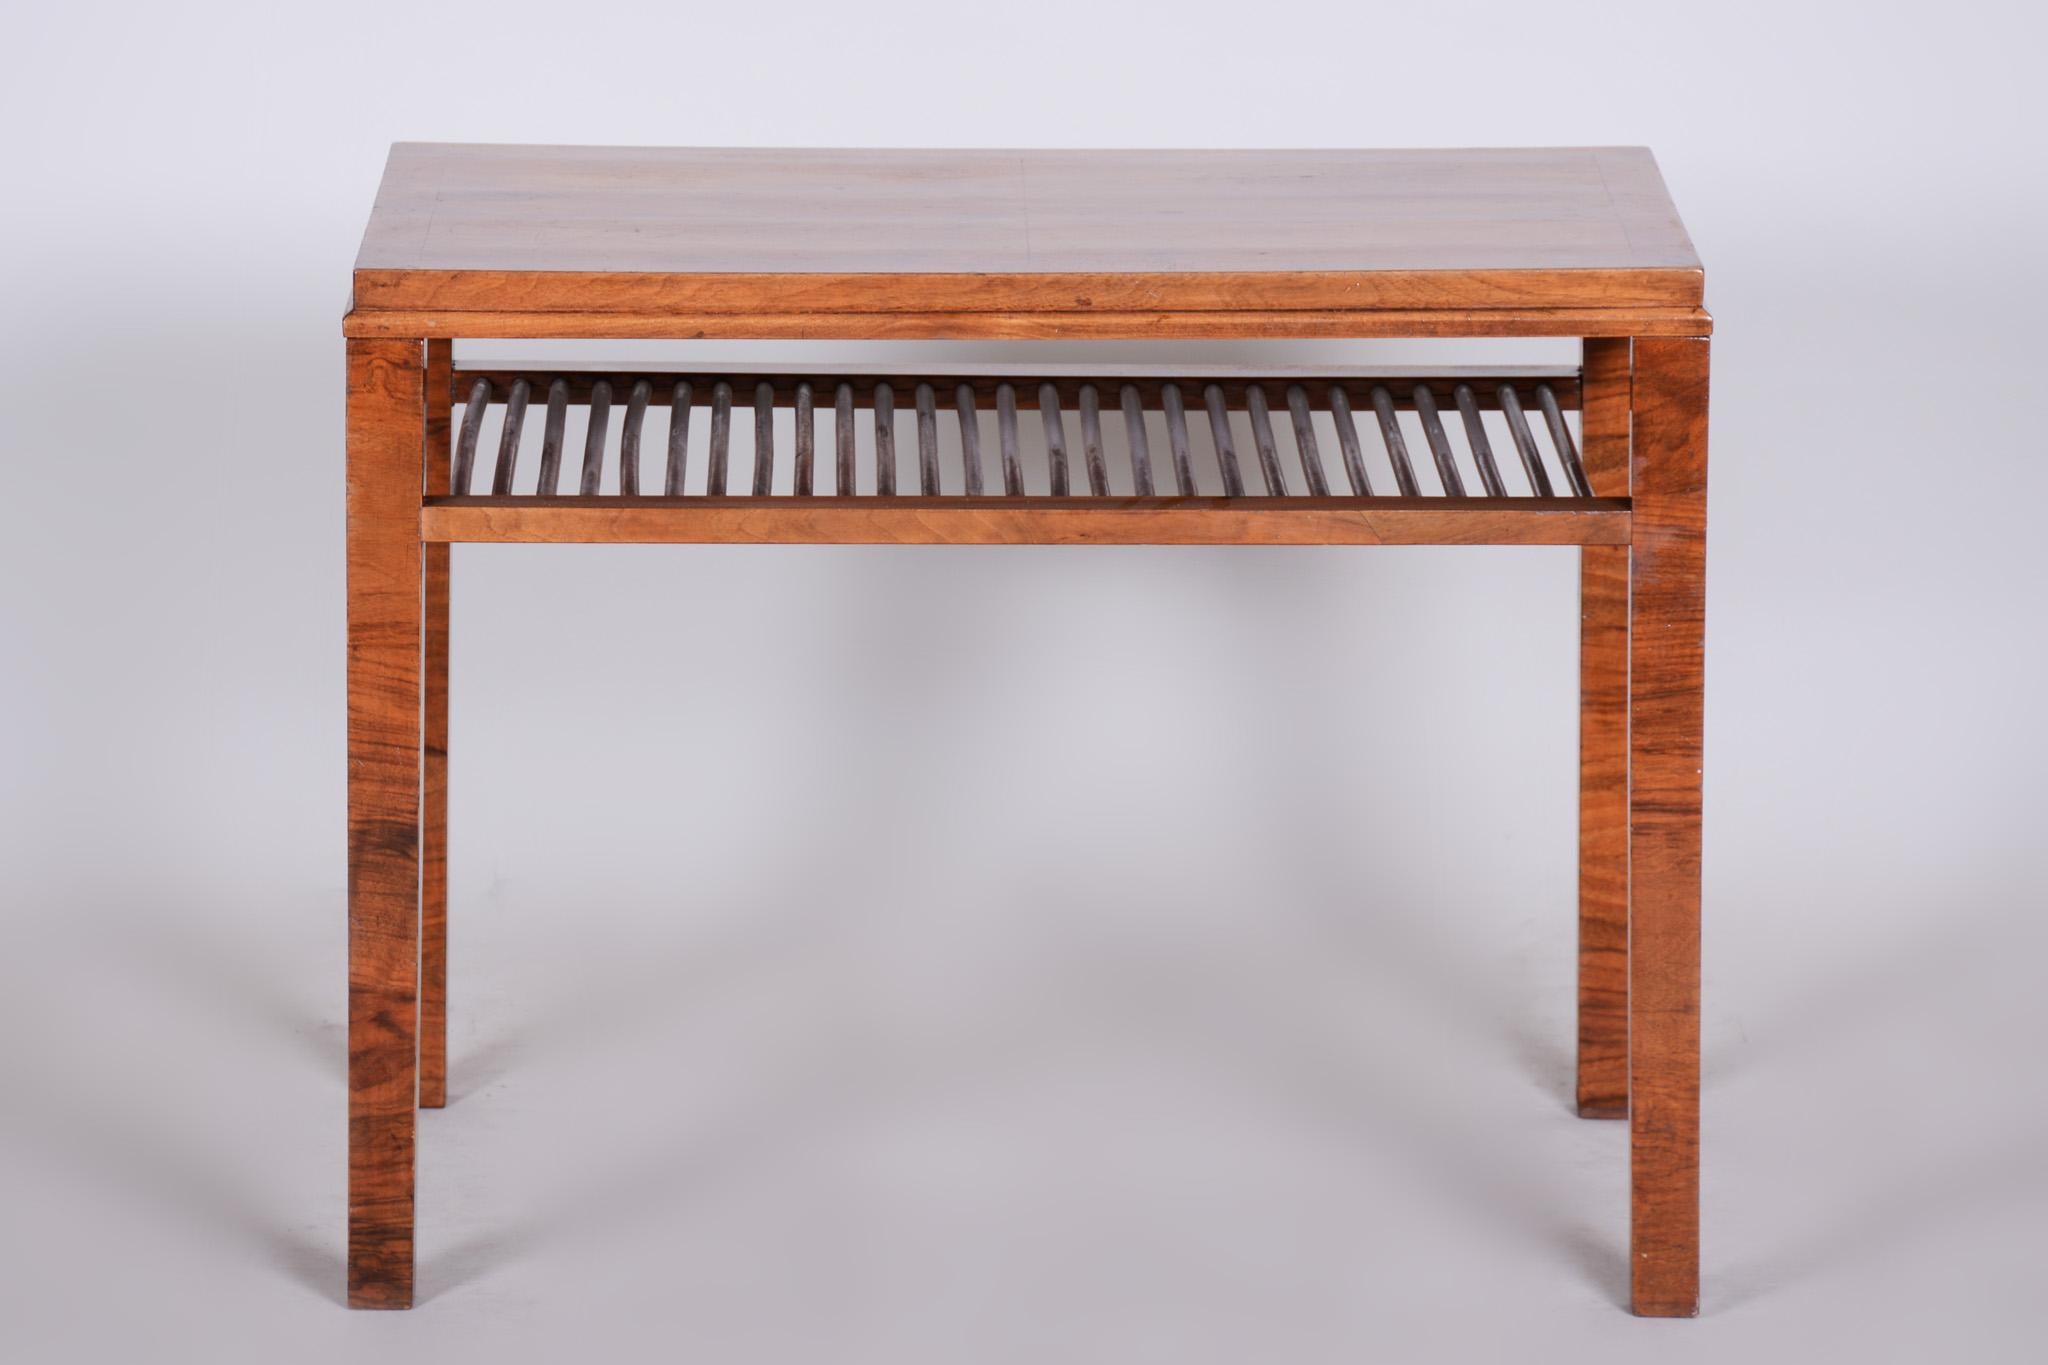 Completely Restored Unusual Brown Art Deco Walnut Coffee Table, Czechia, 1930s For Sale 1